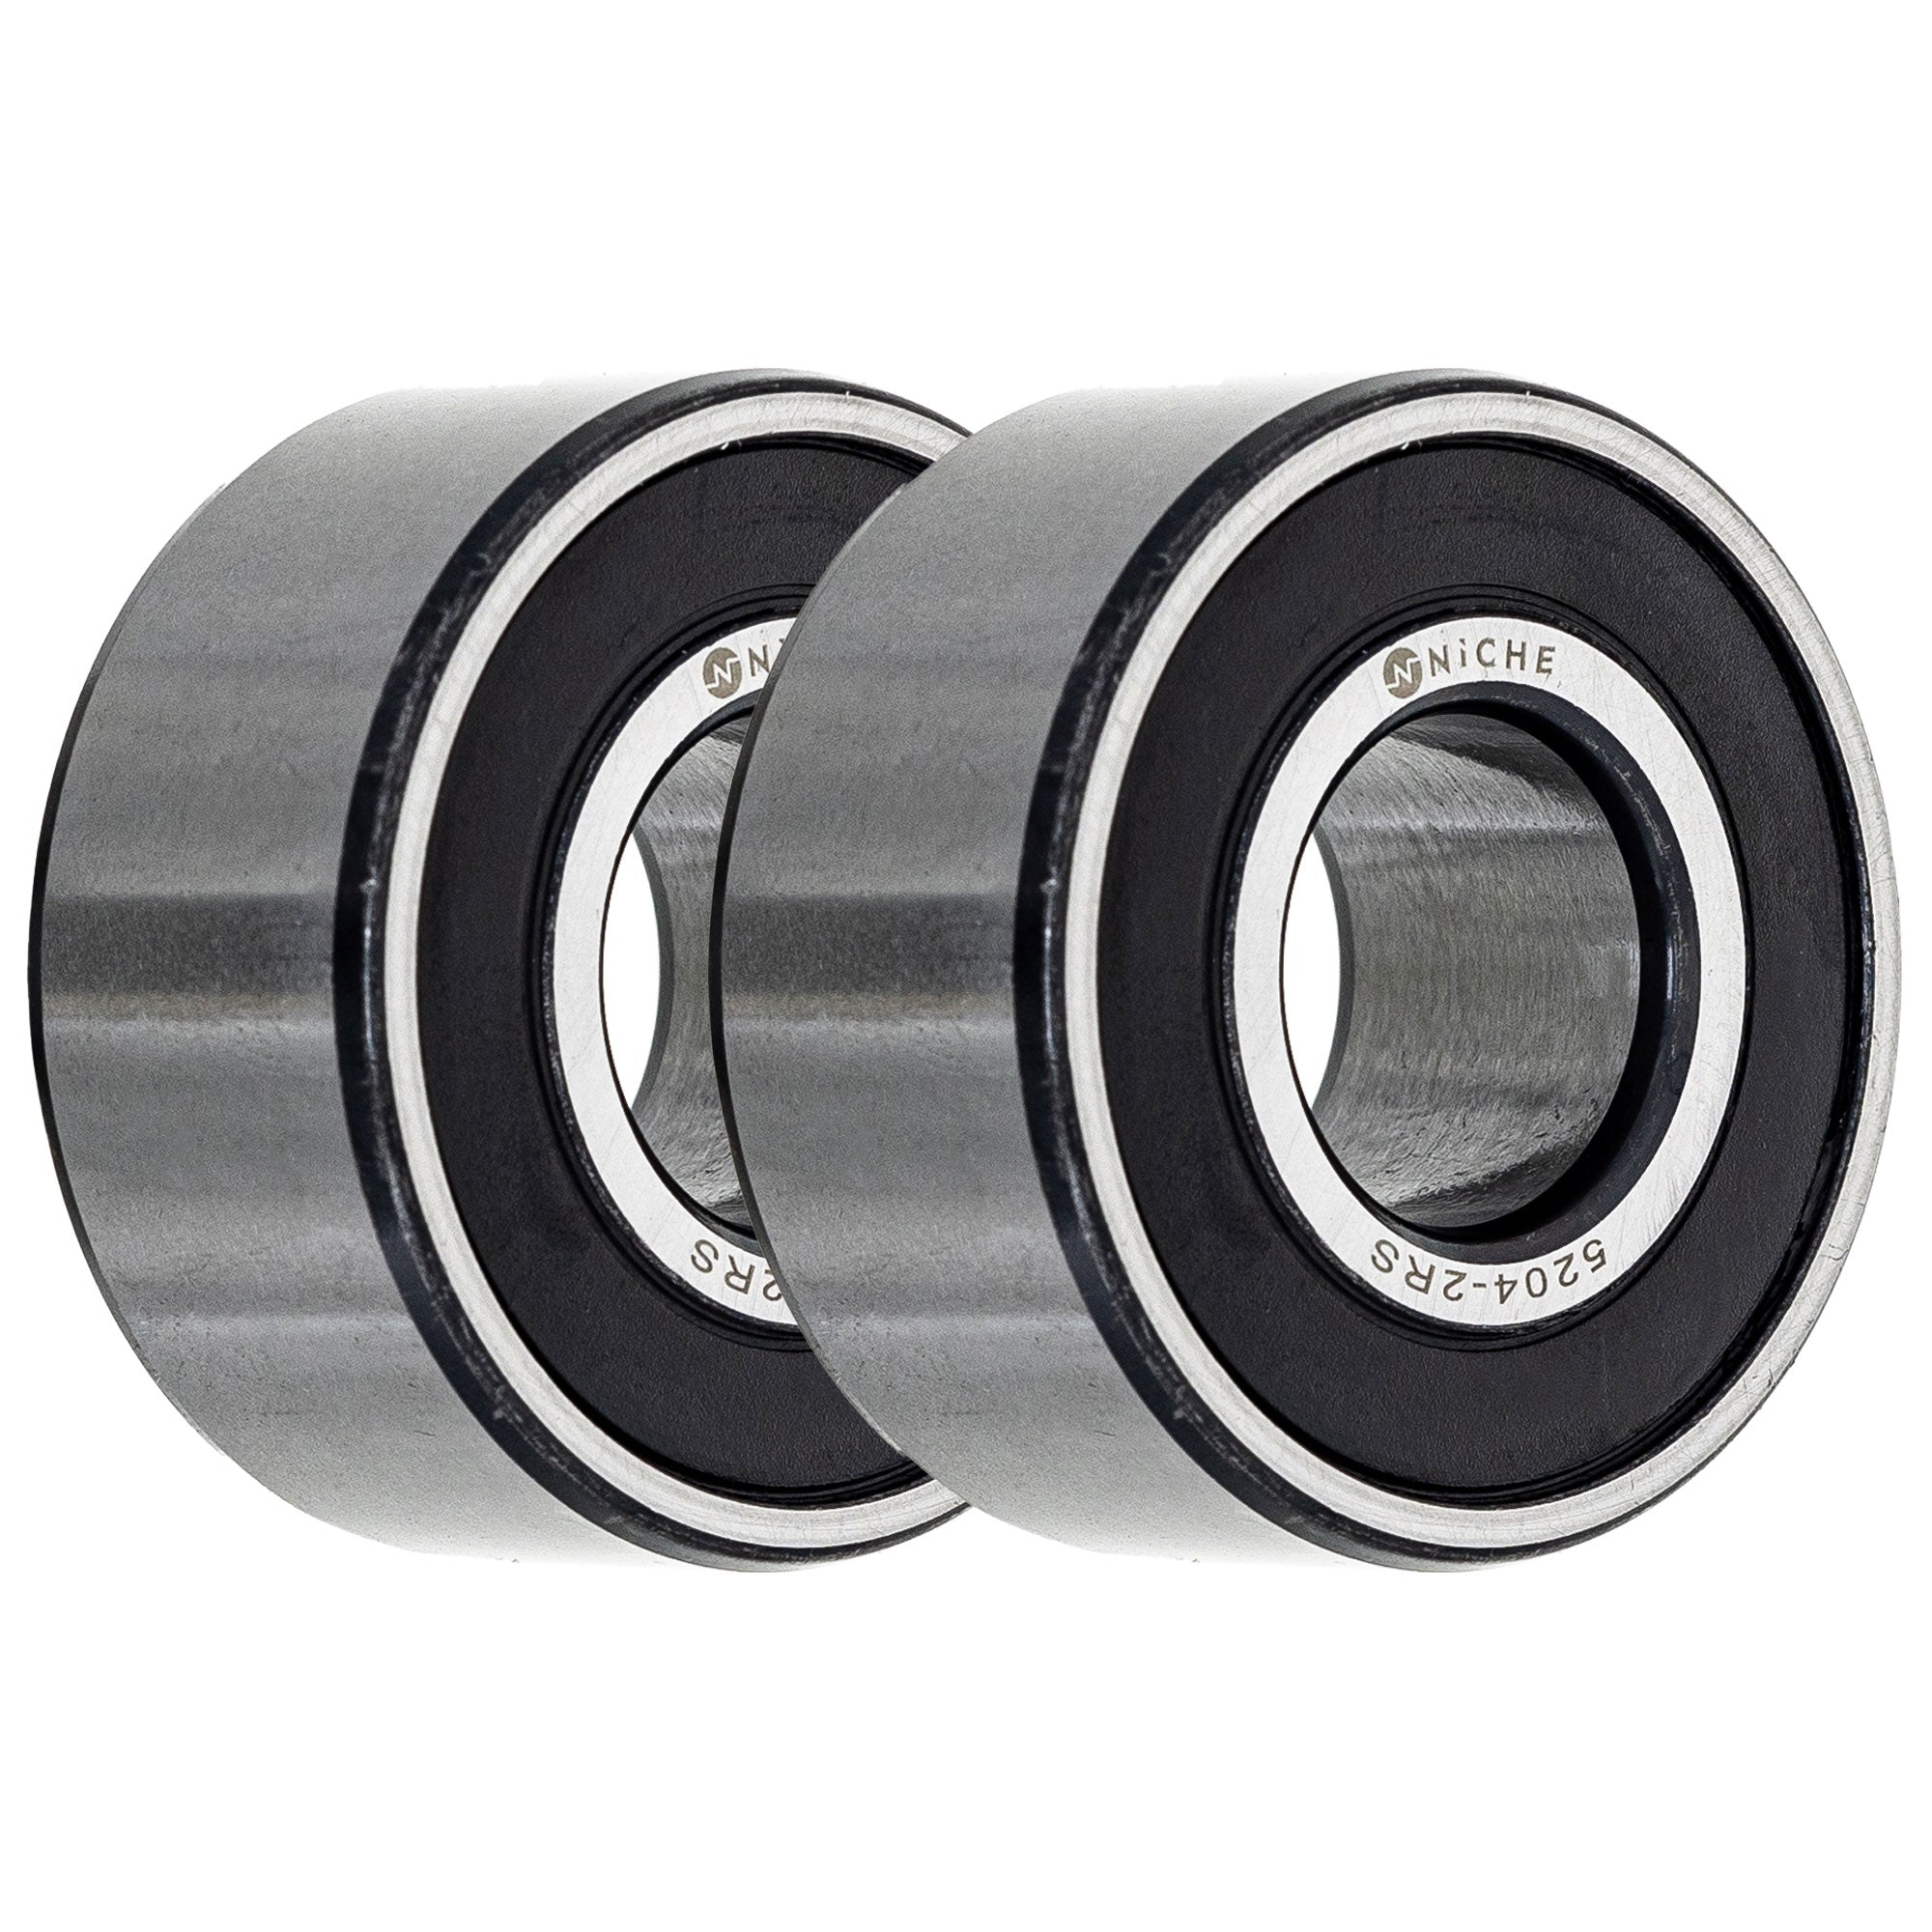 Double Row, Angular Contact, Ball Bearing Pack of 2 2-Pack for zOTHER XR650R VTX1800T NICHE 519-CBB2260R